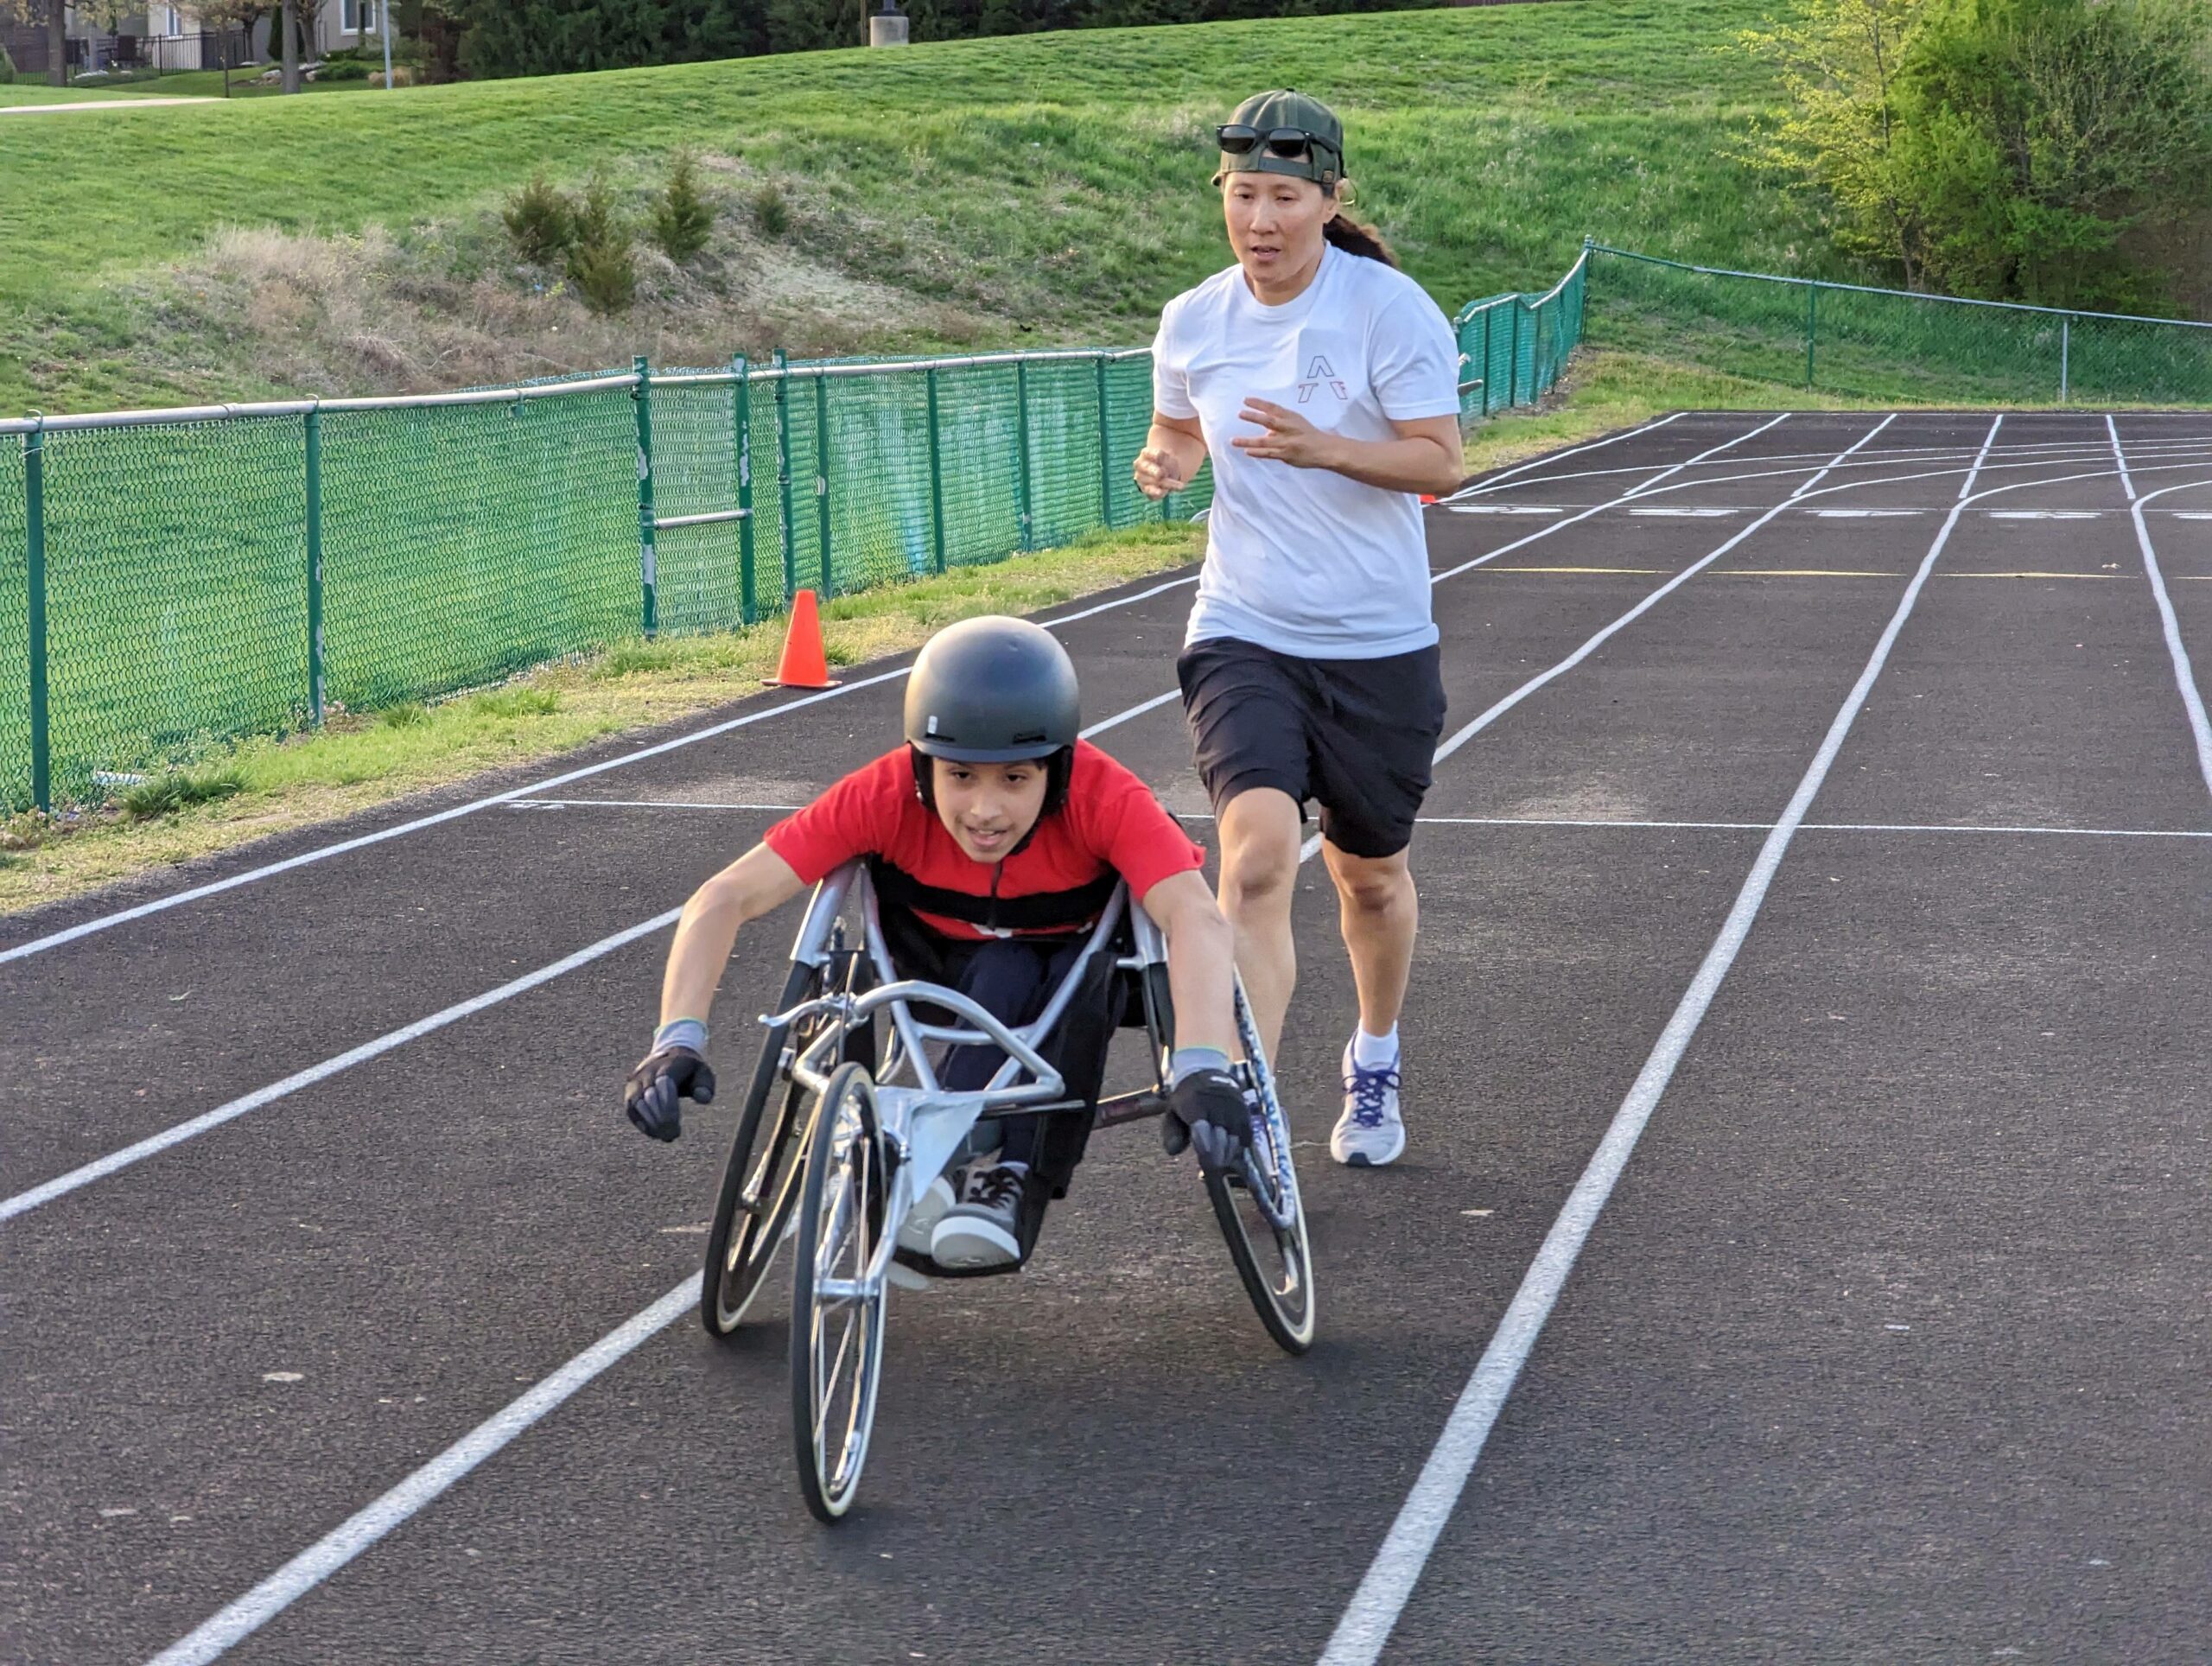 Two people on a track, one running and one in an athletic wheelchair